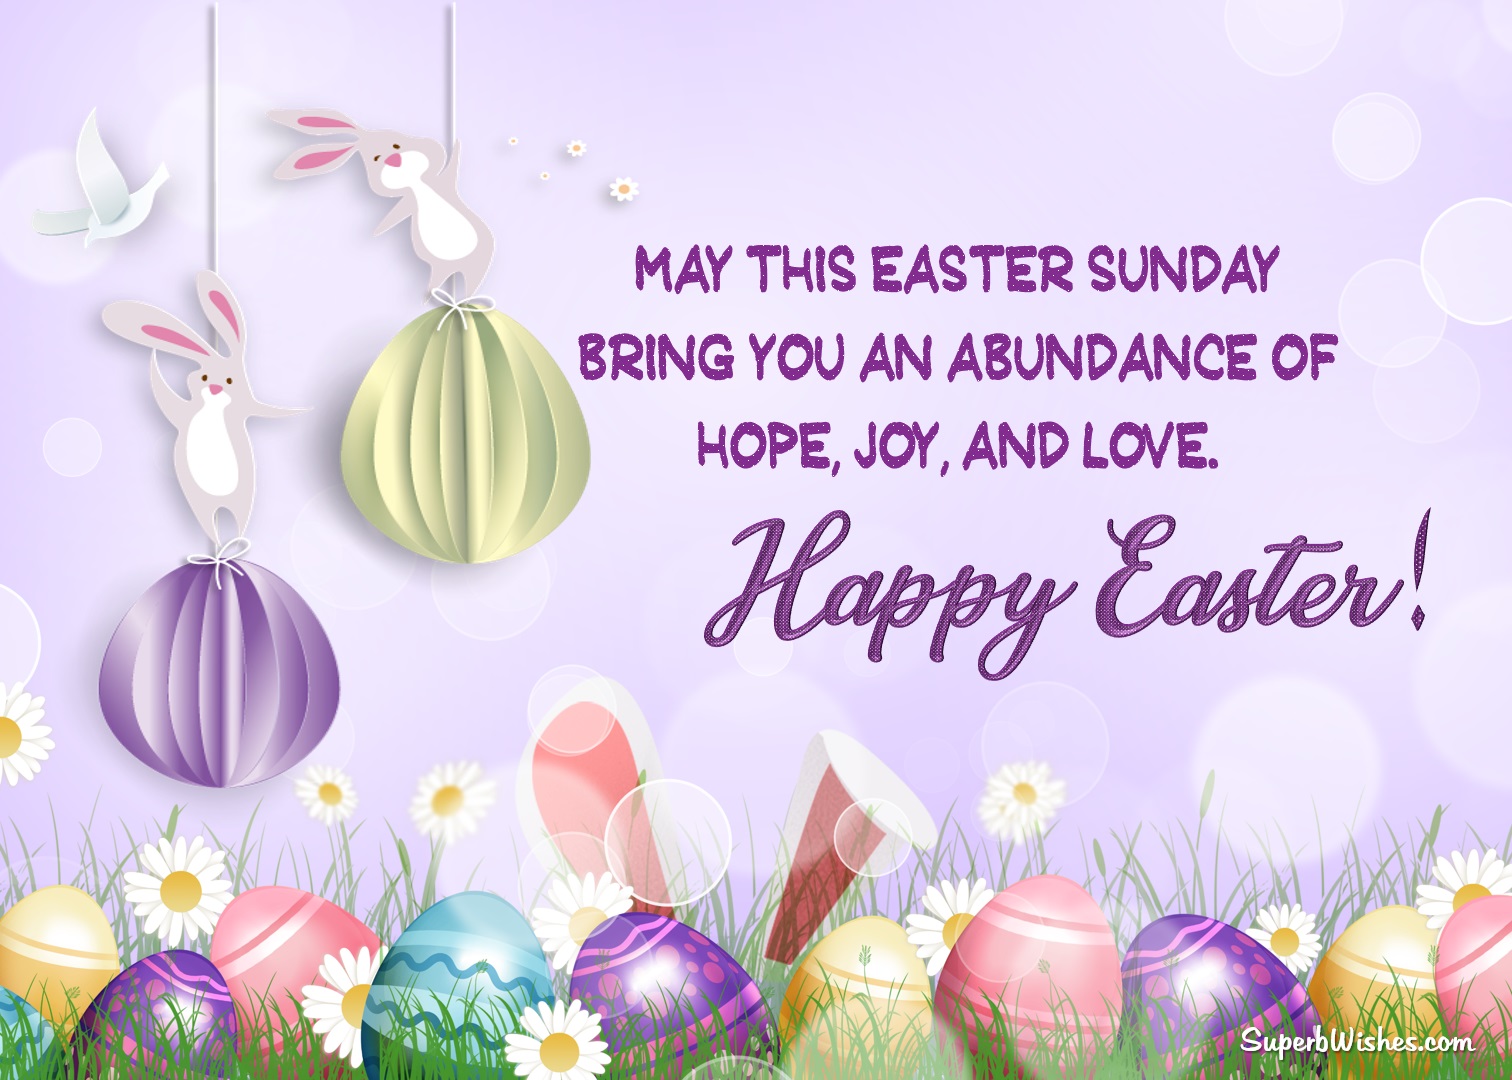 Happy Easter Blessing Images by SuperbWishes